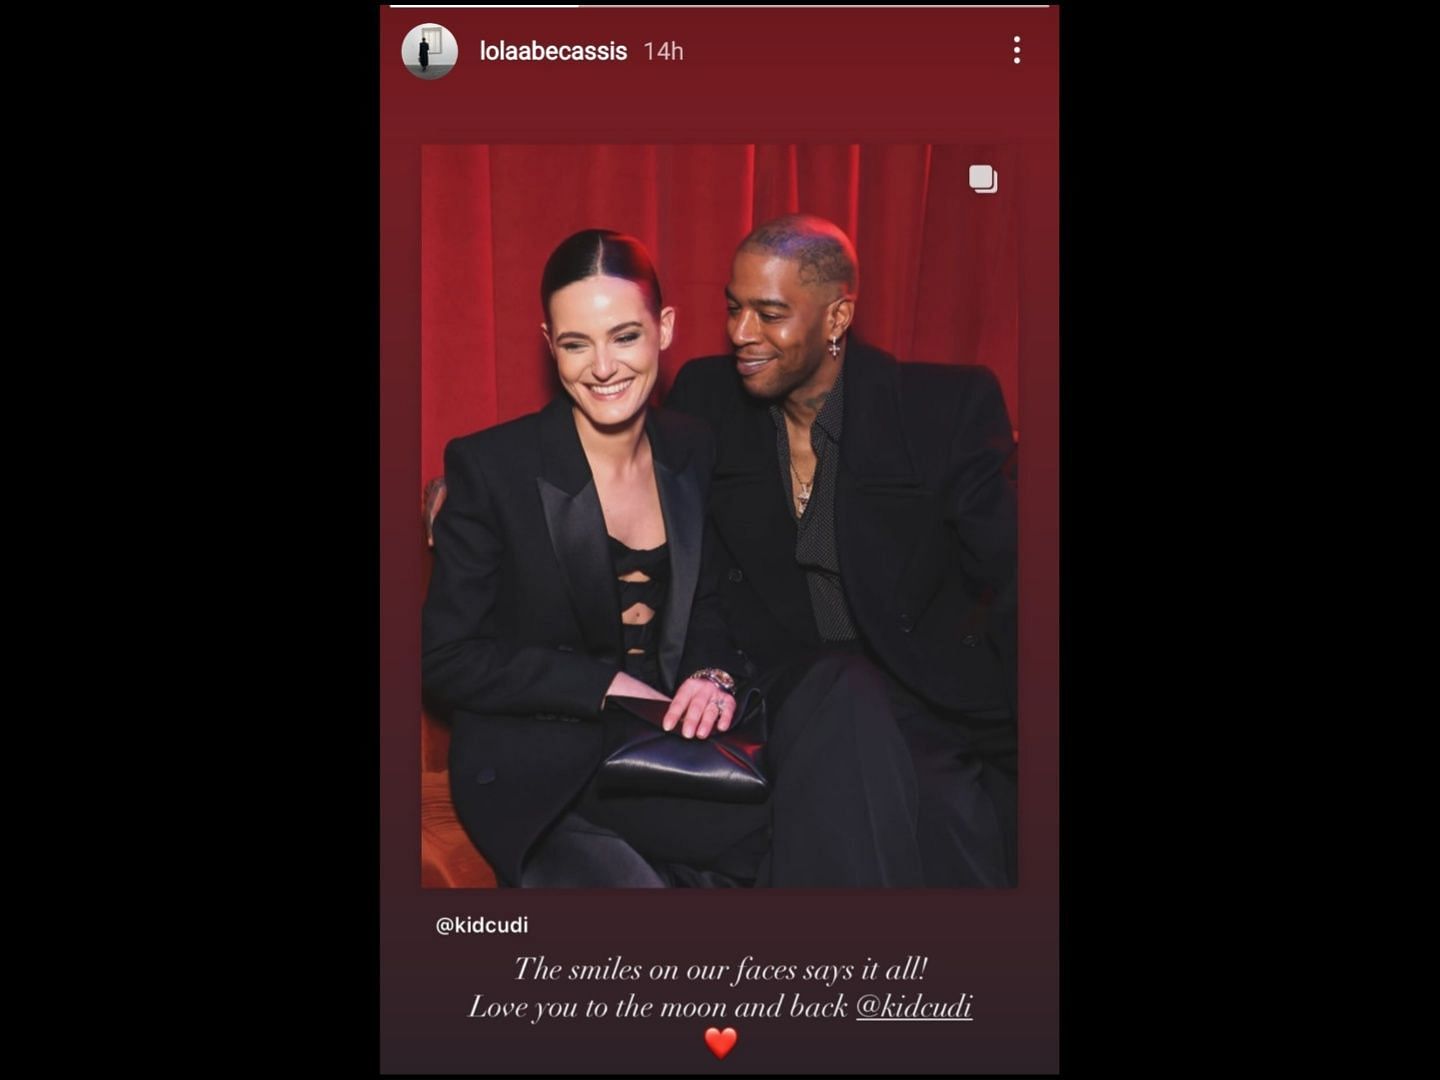 Lola Abecassis Sartore shares Cudi&#039;s post on her Instagram story. (Image via Instagram/@lolaabecassis)